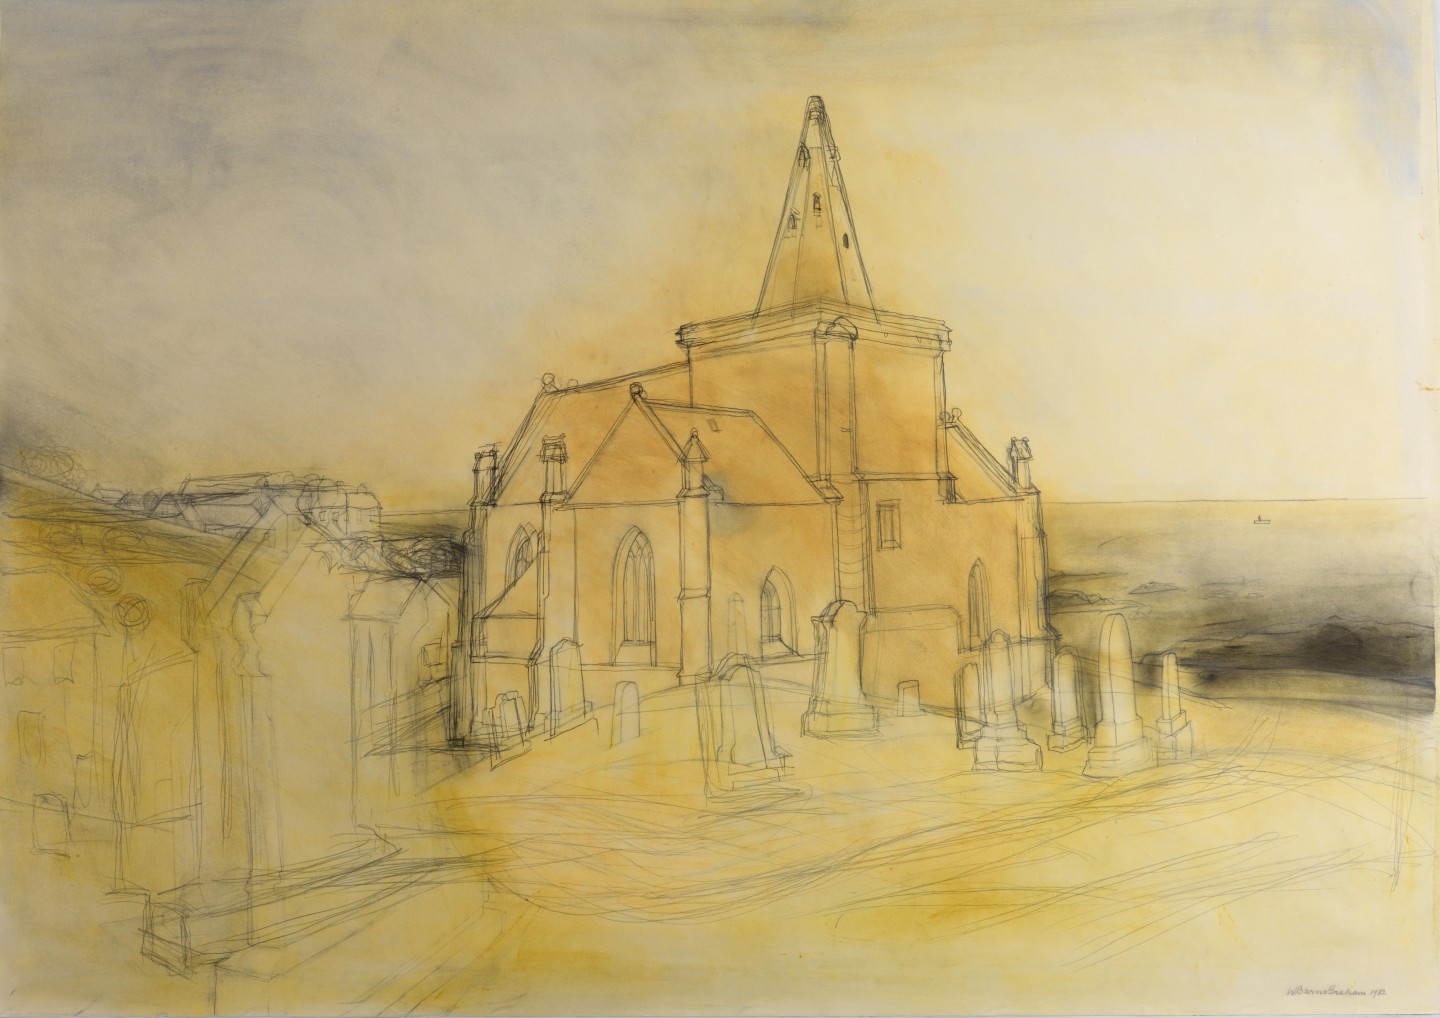 St Monans, 1982, pencil and oil on paper